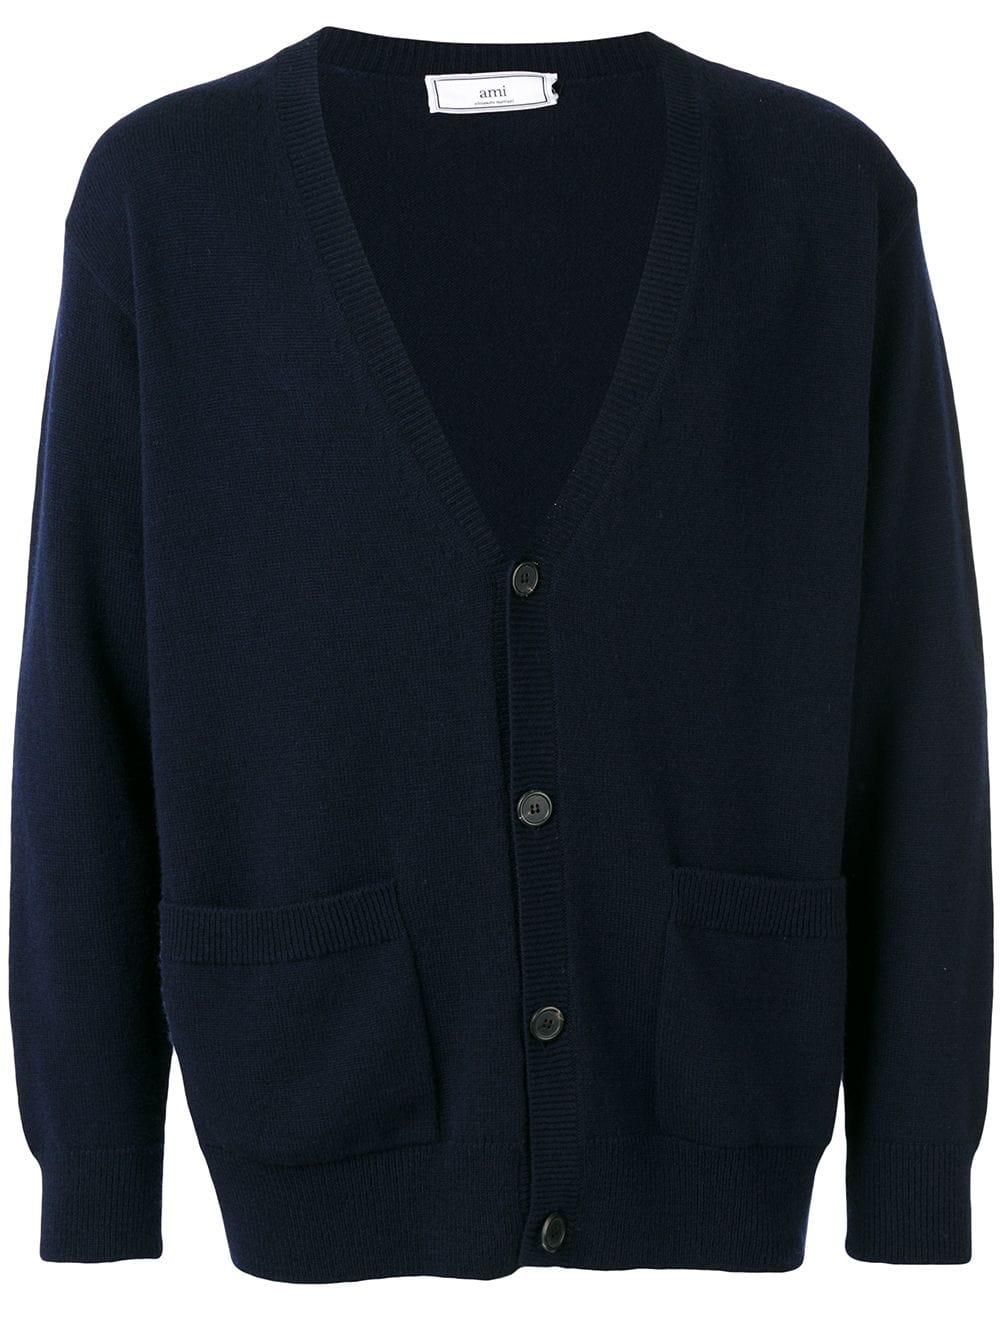 AMI Cashmere Loose-fit Cardigan in Blue for Men - Lyst